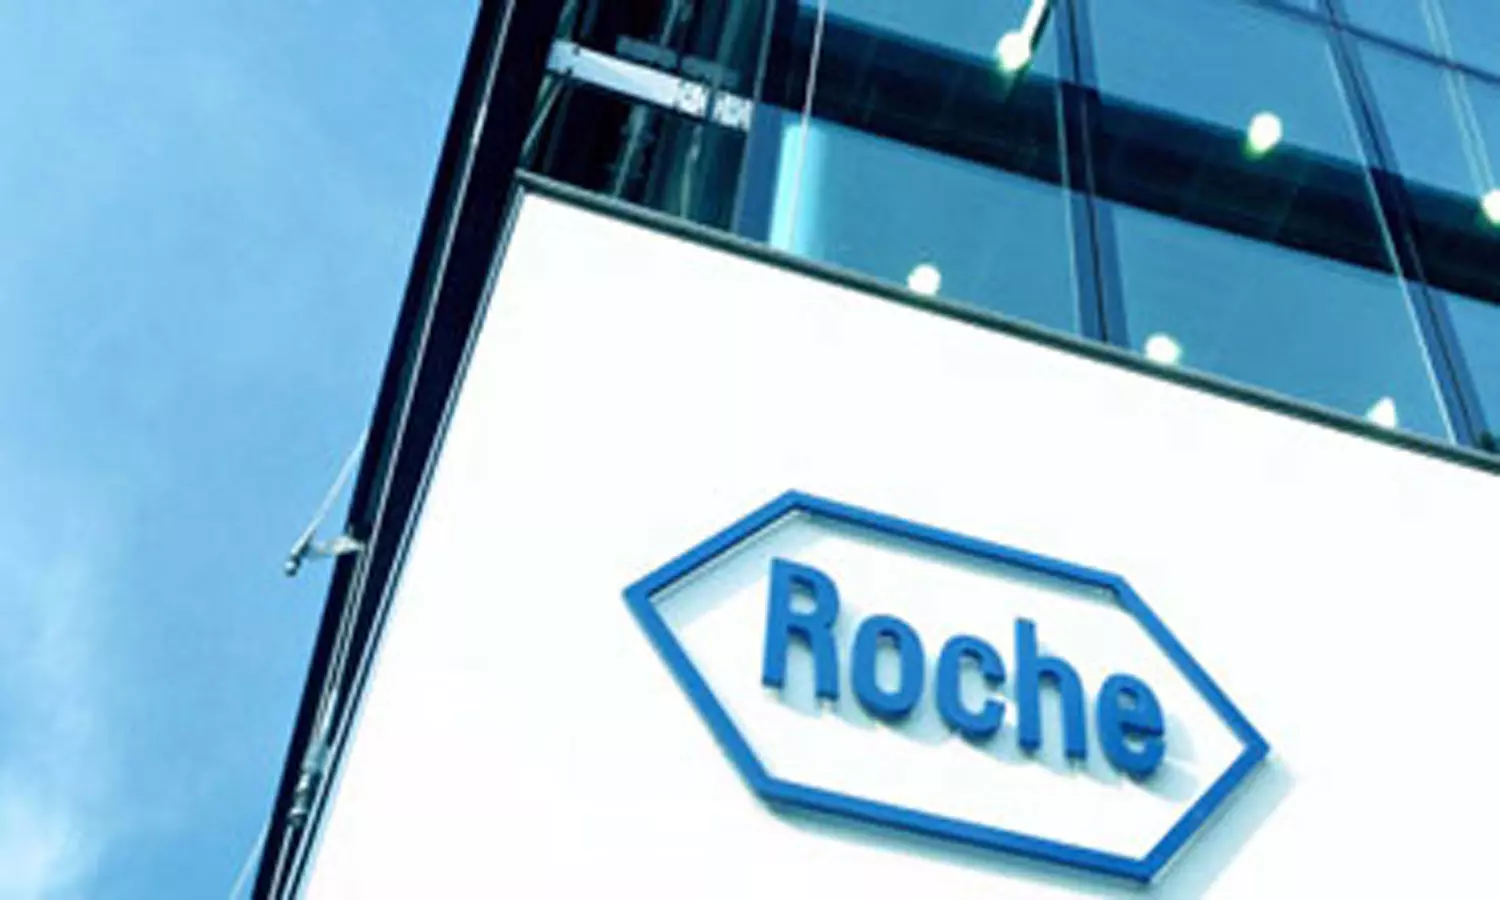 Roche highly anticipated cancer immunotherapy fails in first late-stage trial